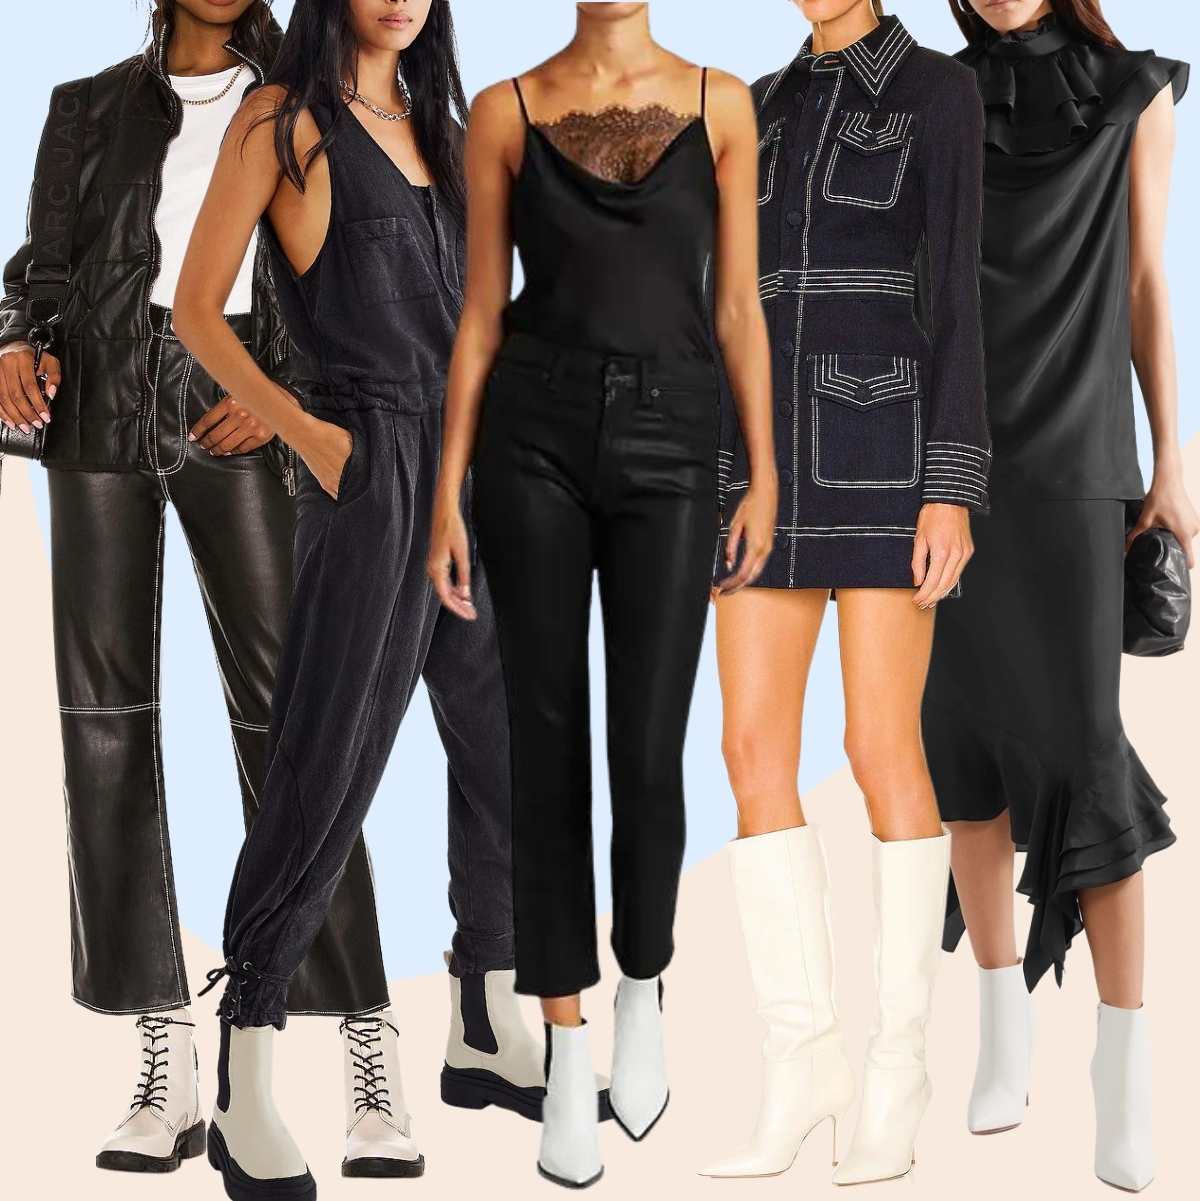 Collage of 5 women wearing different all black clothing with white boots outfits.